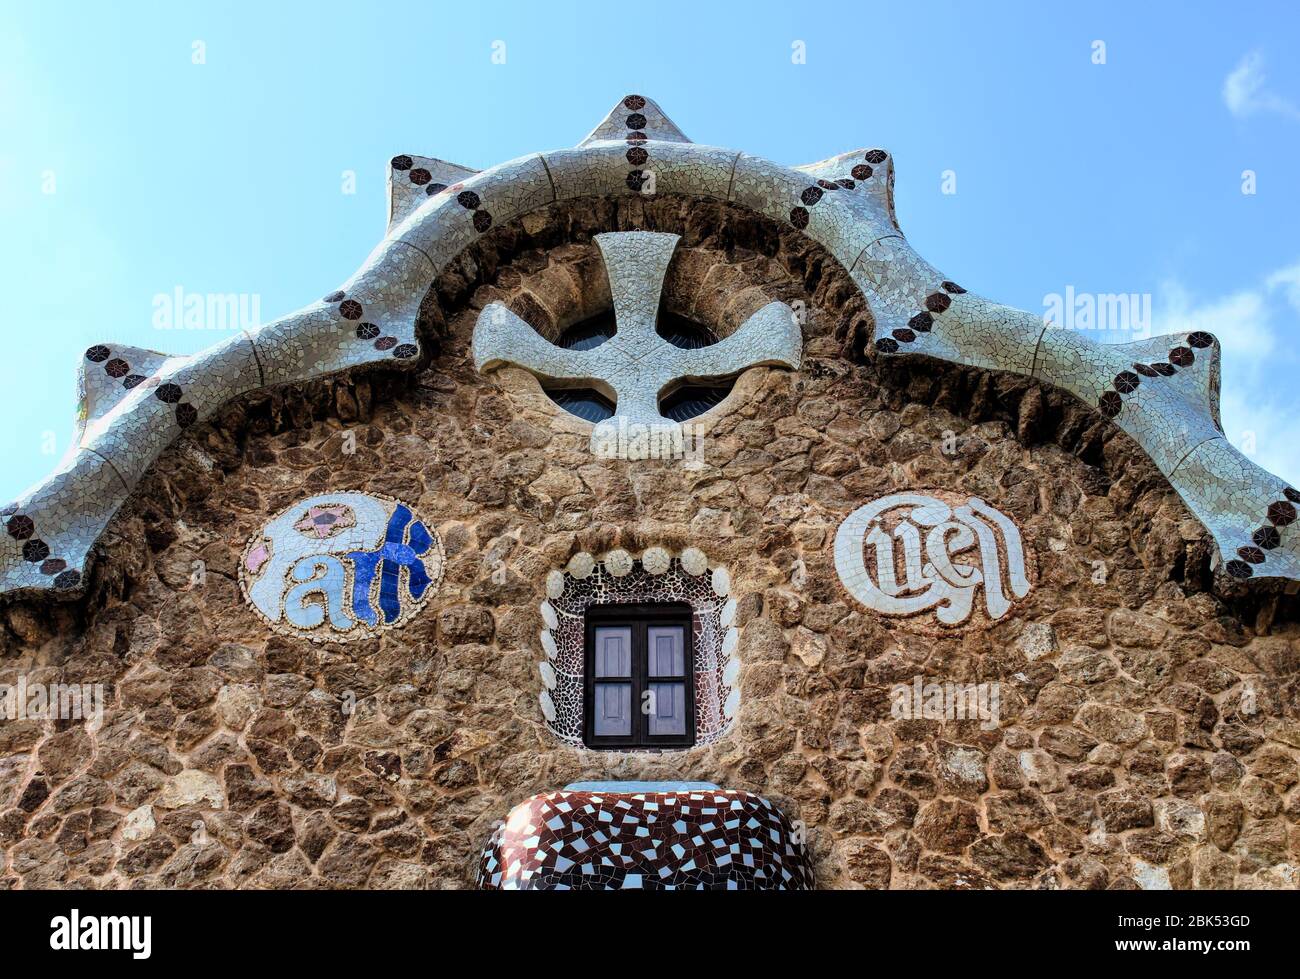 Architectural details of buildings in the Park Güell, located on Carmel Hill in Barcelona, Catalonia, Spain. Architect Antoni Gaudi. Stock Photo